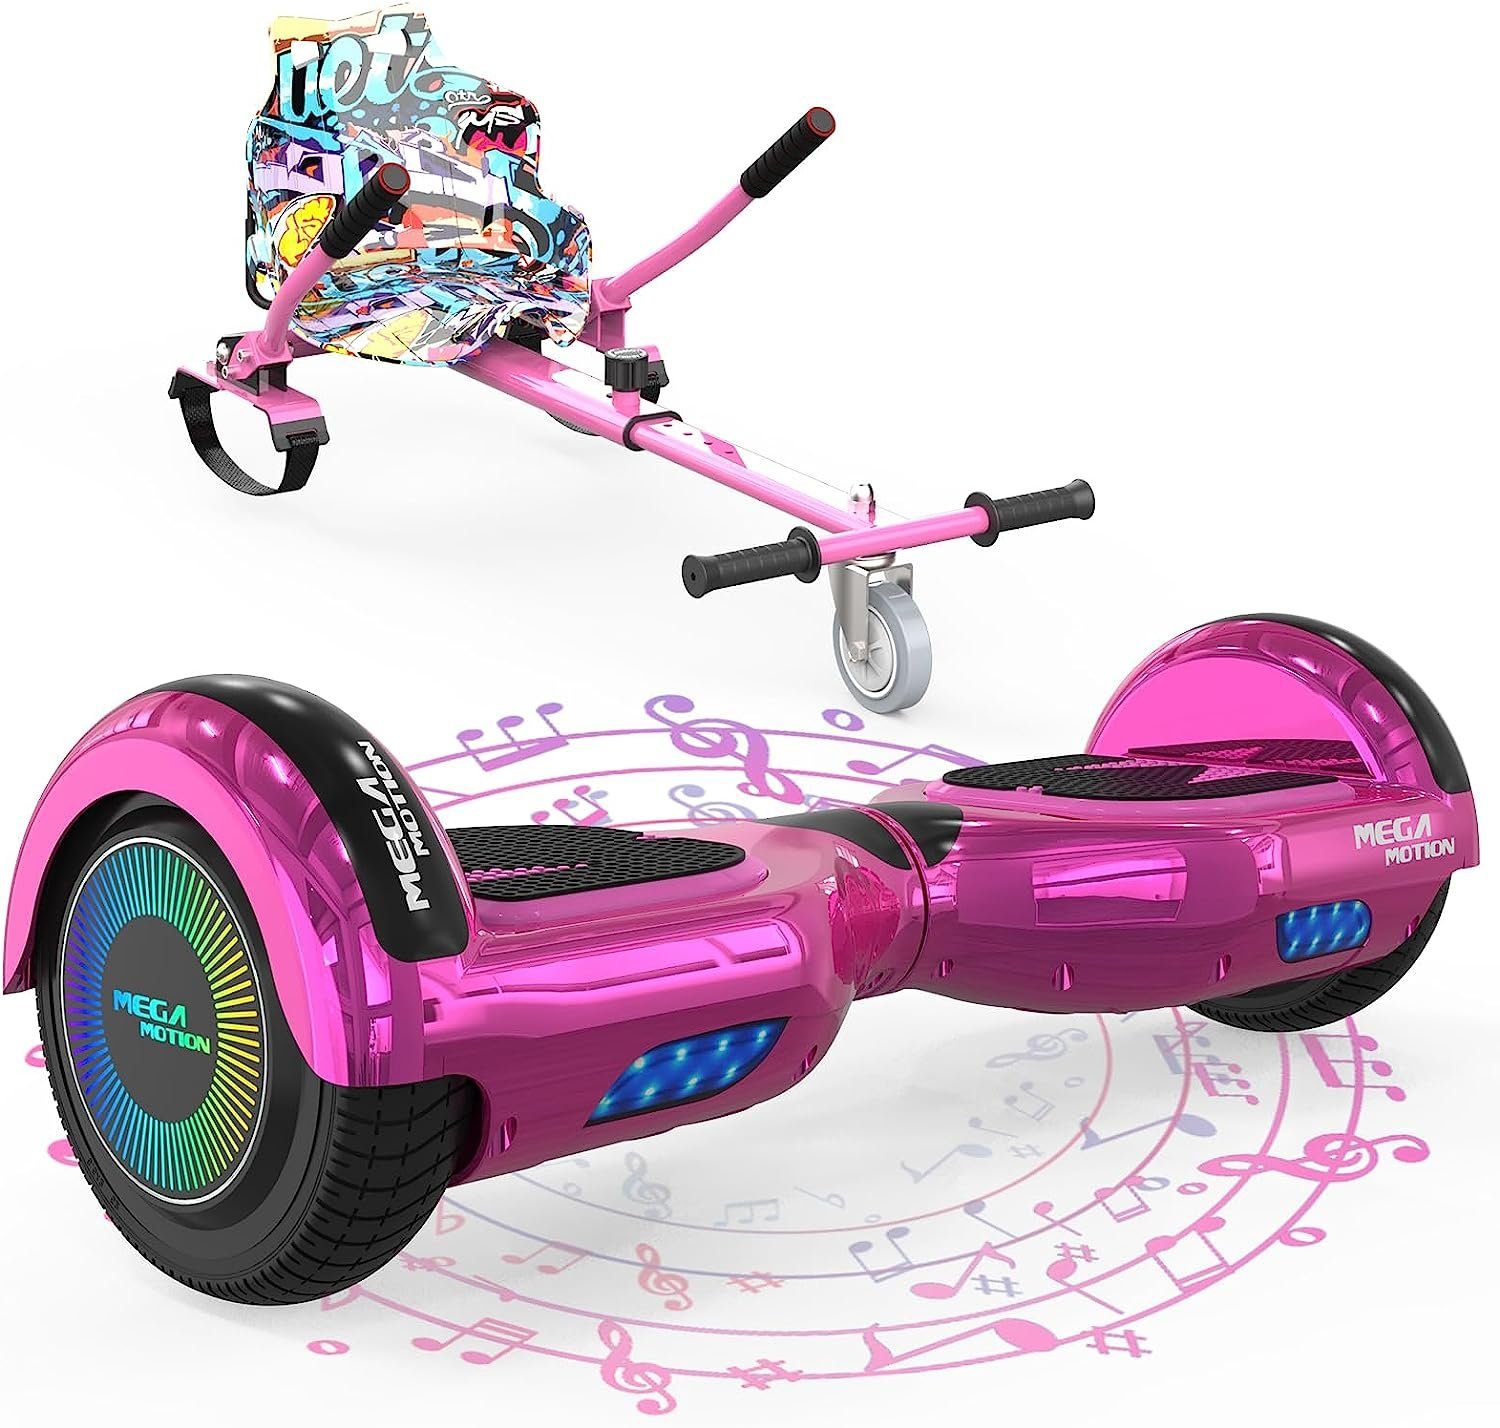 H1 Hot Pink Hoverboard mit sitz Rosa 700w